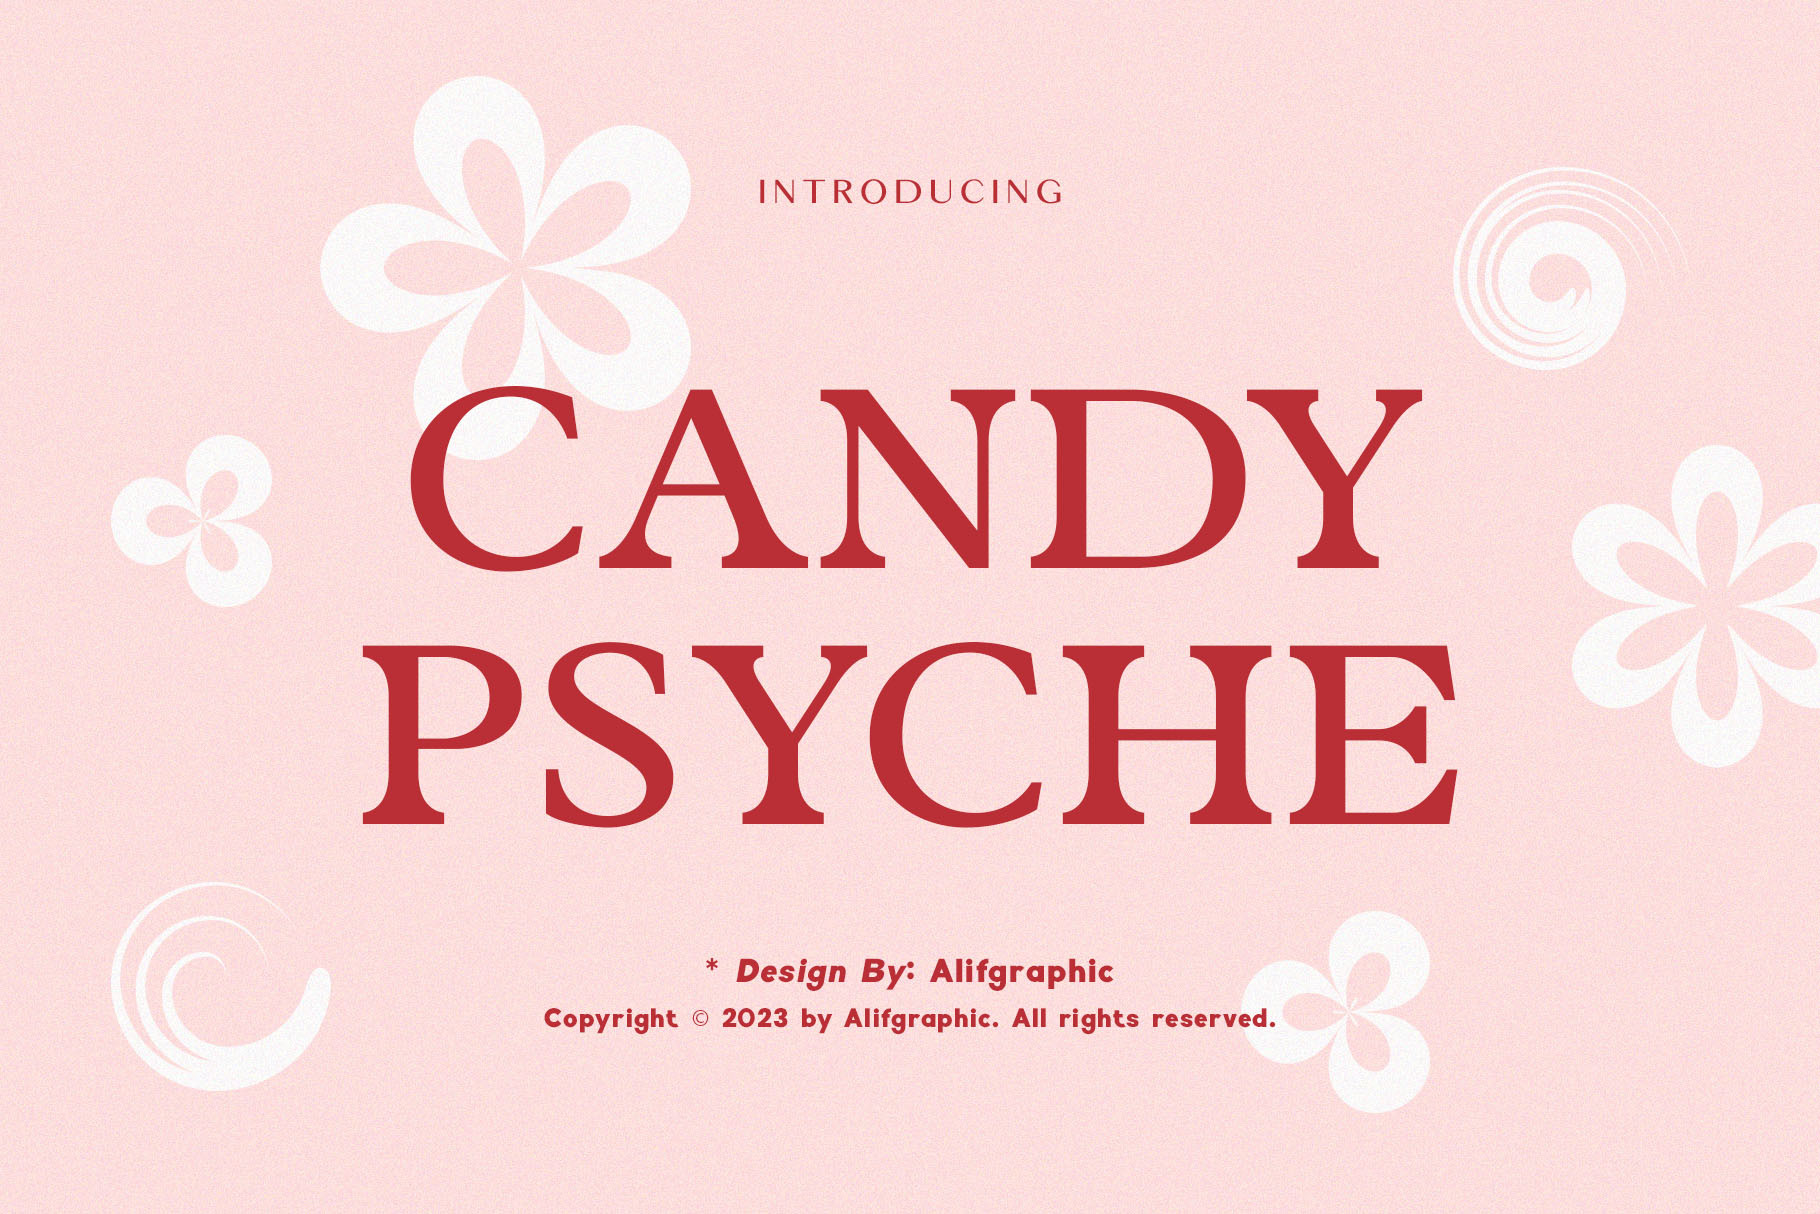 Candy Psyche